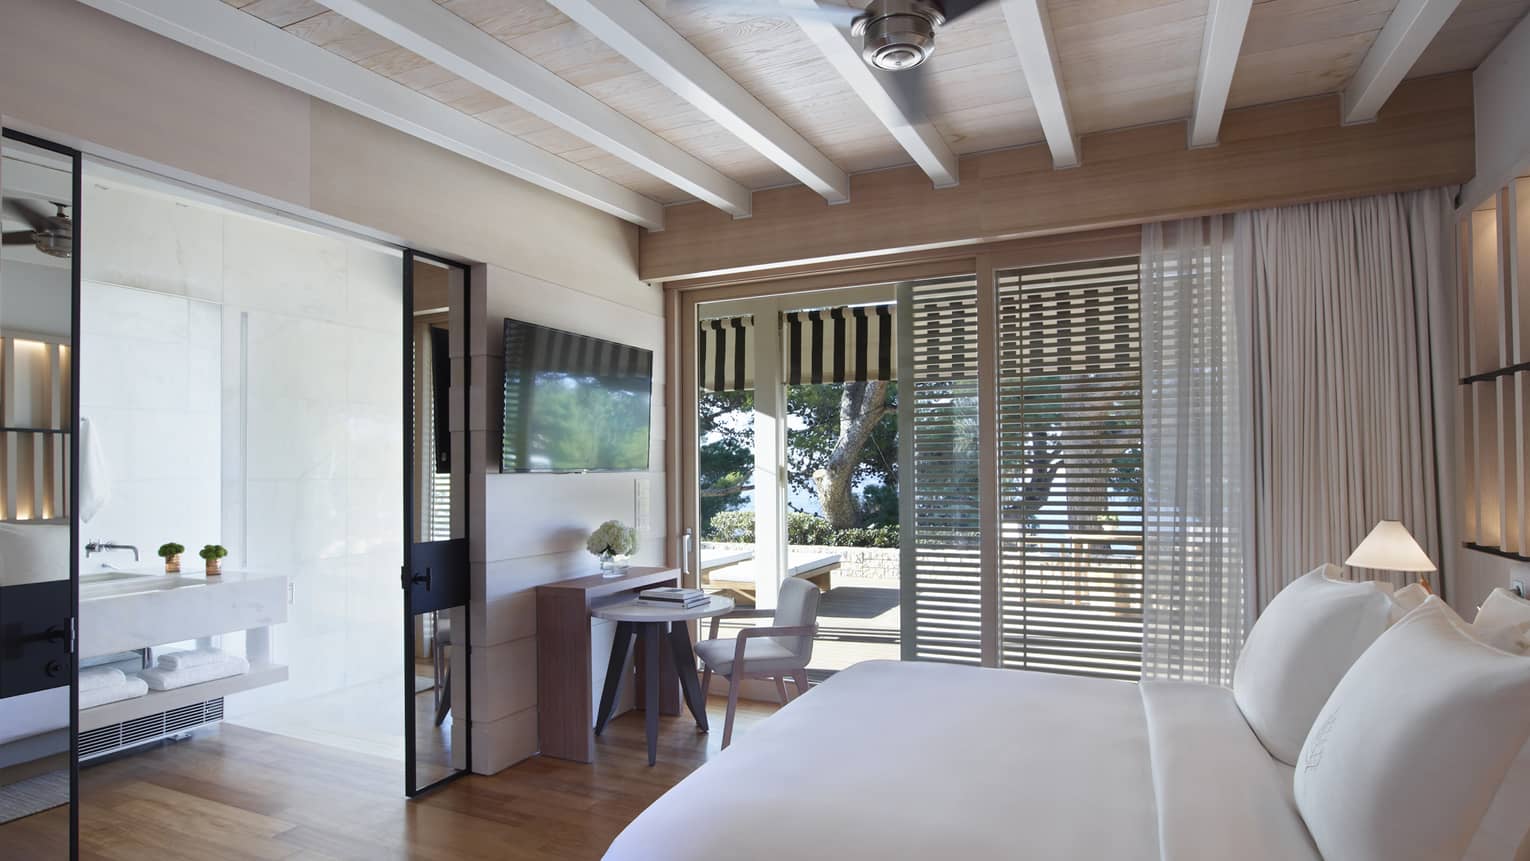 Guest room with white king bed, exposed rafter ceiling, sliding doors opening onto patio, mirrored doors to bathroom